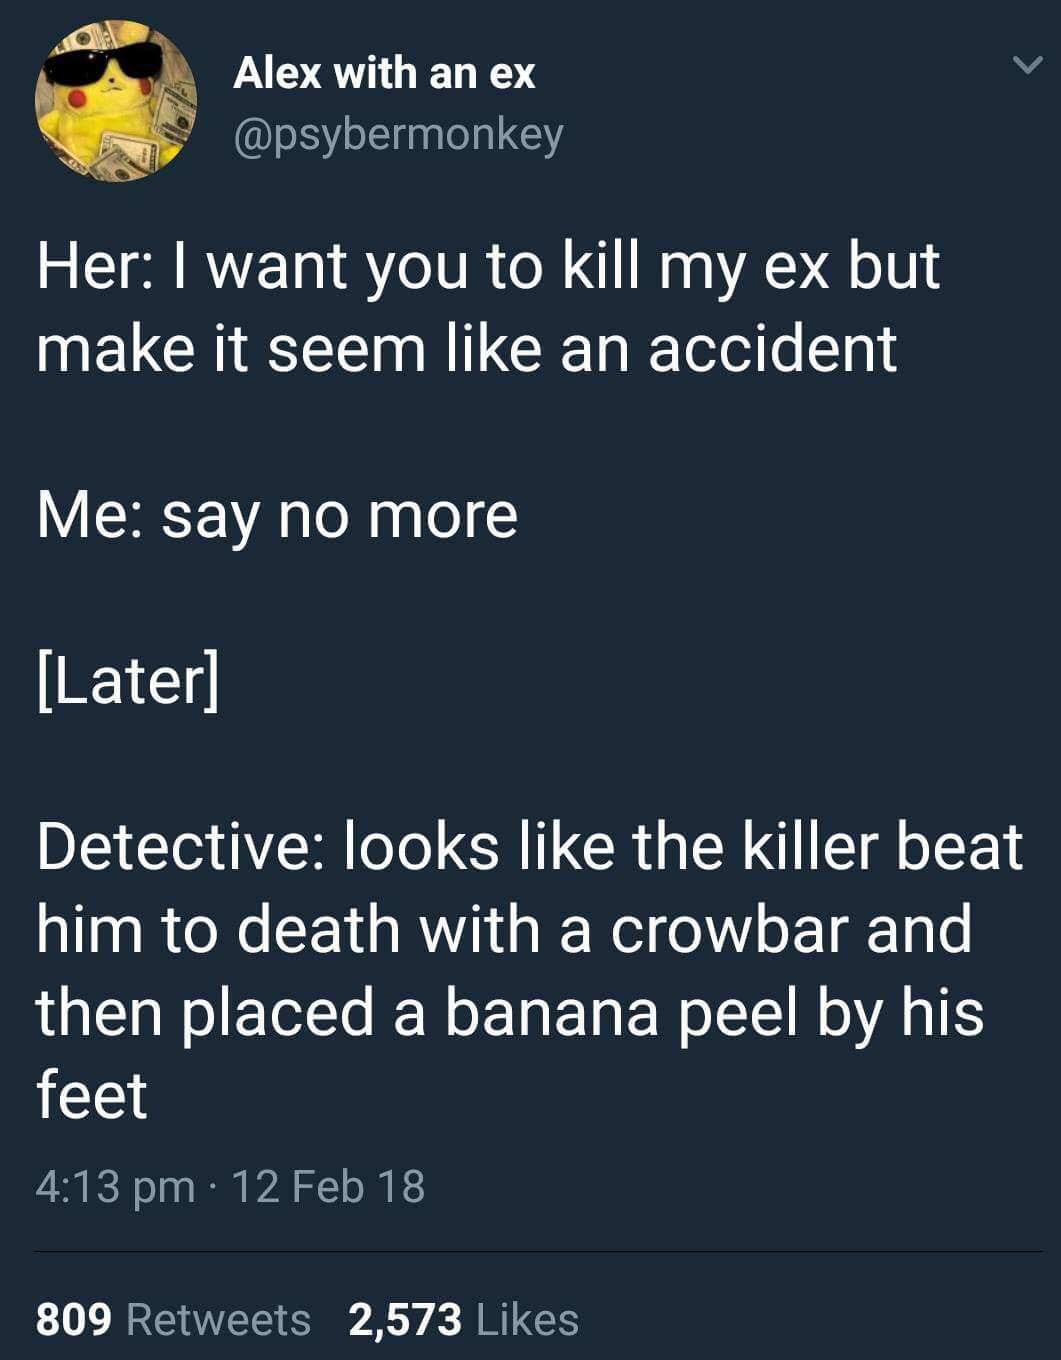 Funny meme - people so fucking stupid - Alex with an ex Her I want you to kill my ex but make it seem an accident Me say no more Later Detective looks the killer beat him to death with a crowbar and then placed a banana peel by his feet 12 Feb 18 809 2,57